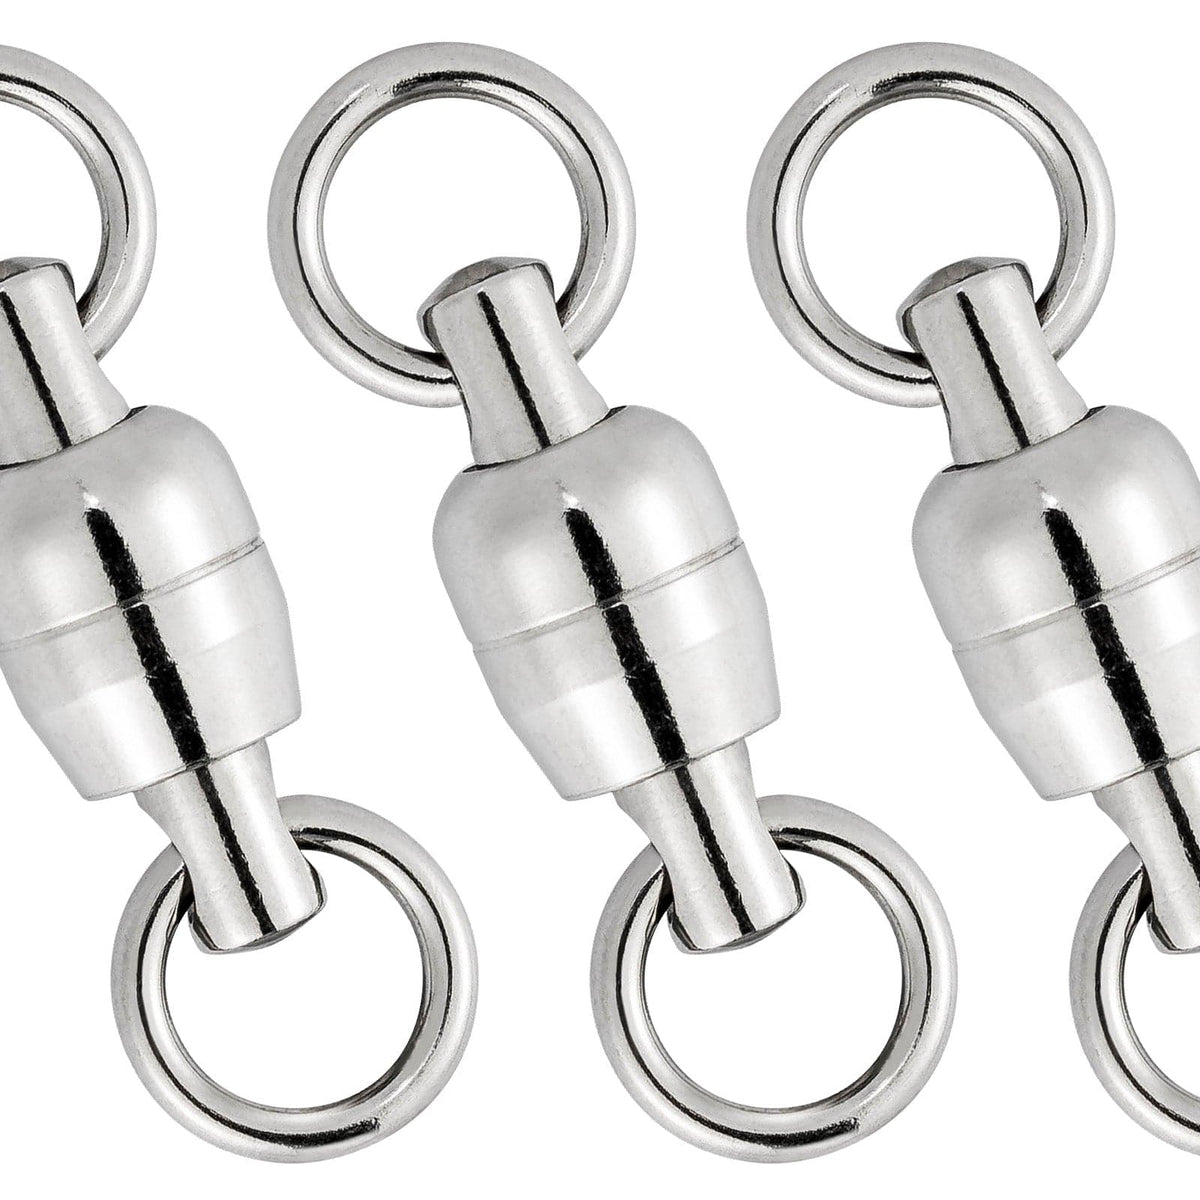 2# 25kg)30pcs Fishing Stainless Steel Swivels with Snaps Ball Bearing  Swivels